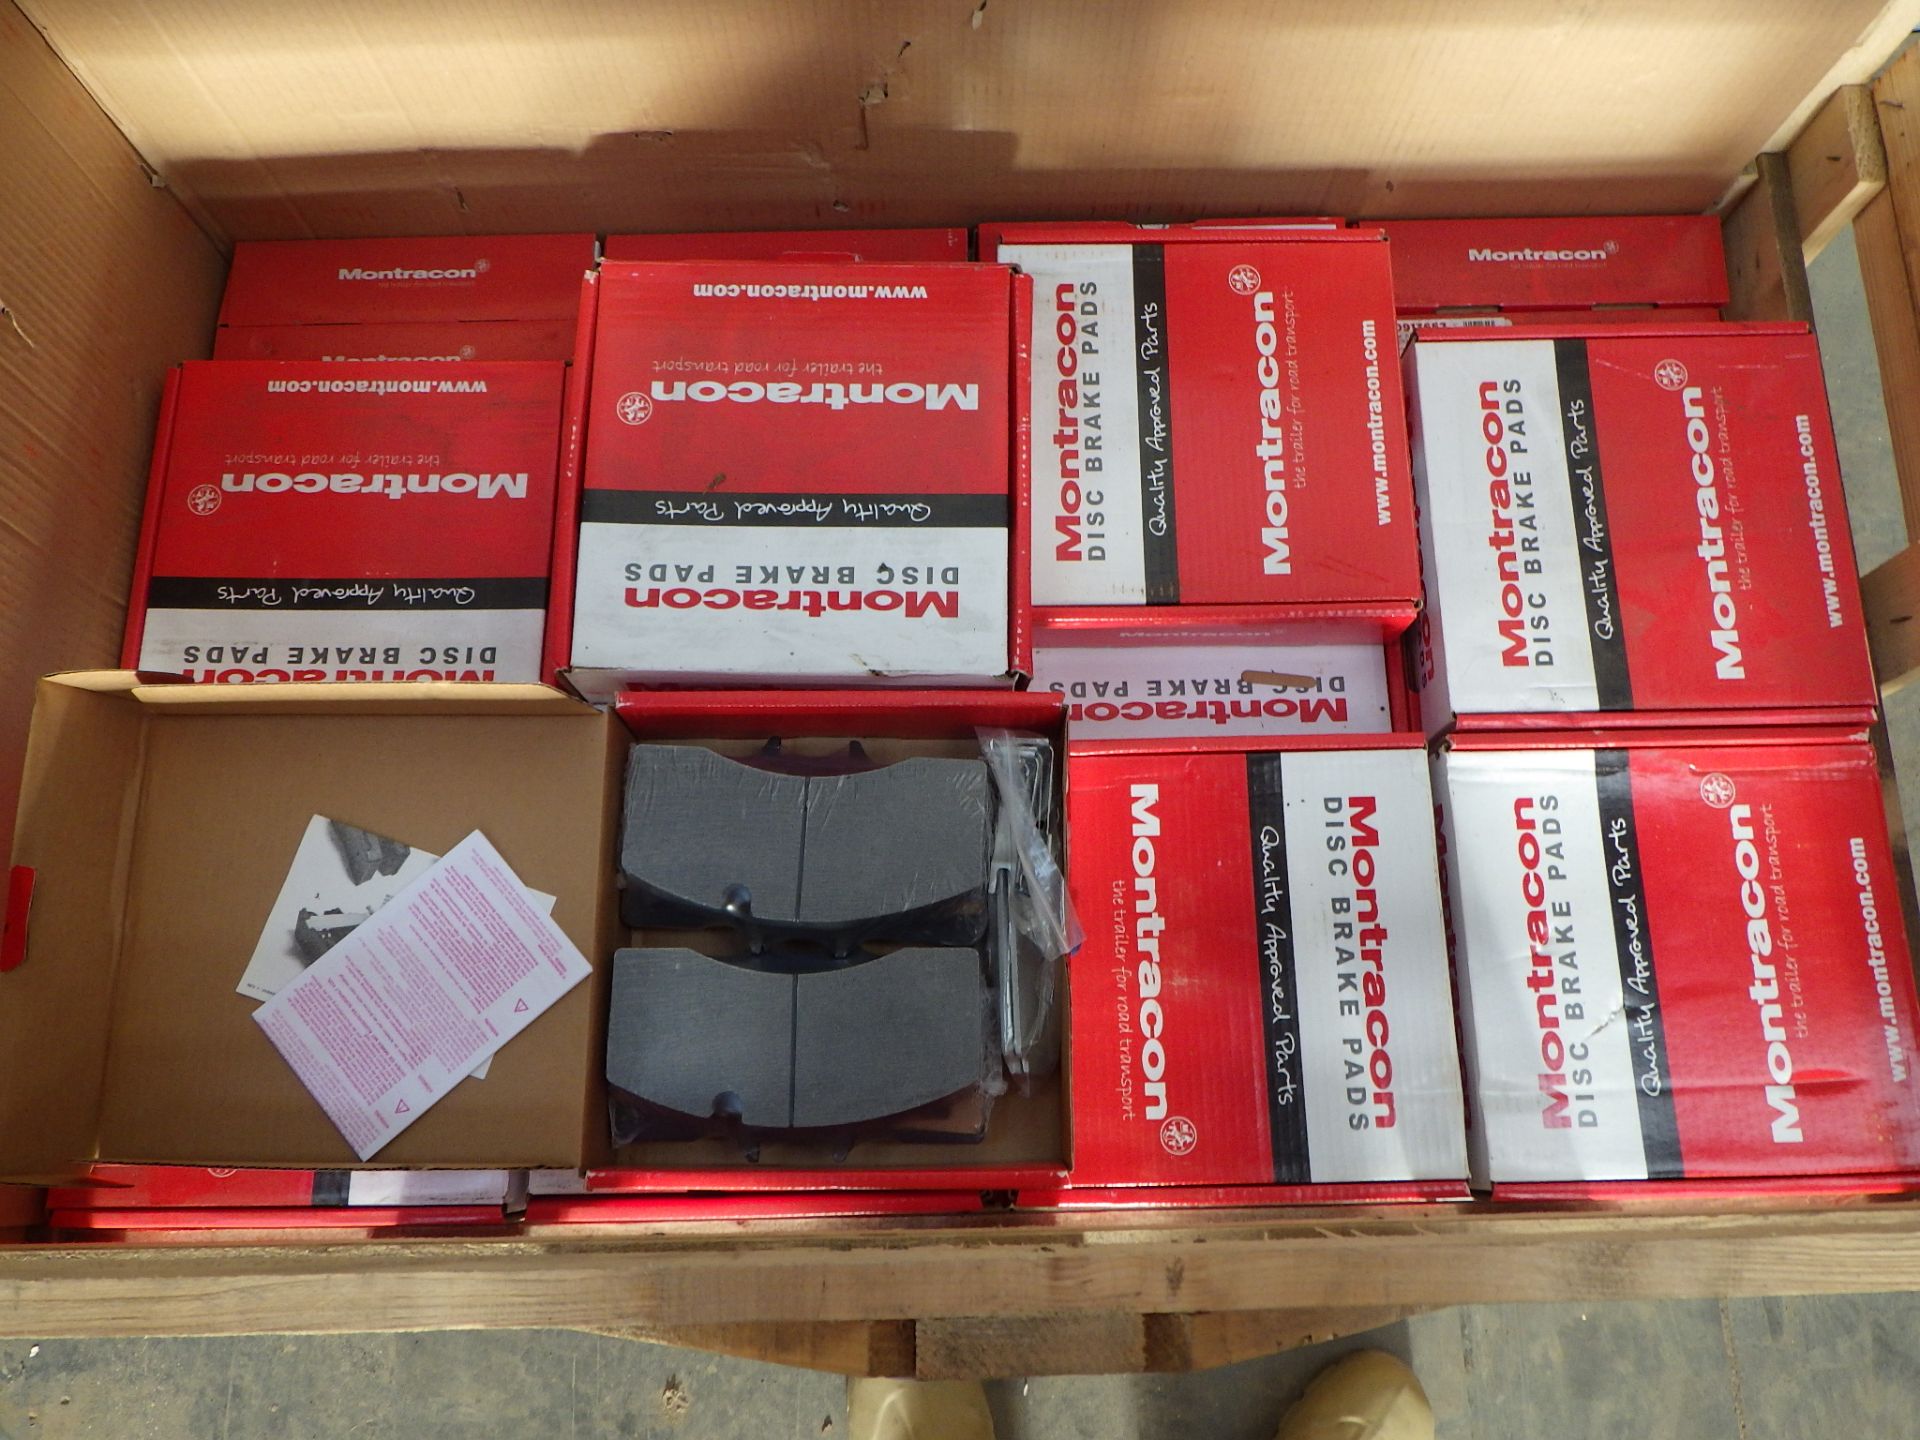 MONTRACON BRAKE PADS - Image 2 of 4